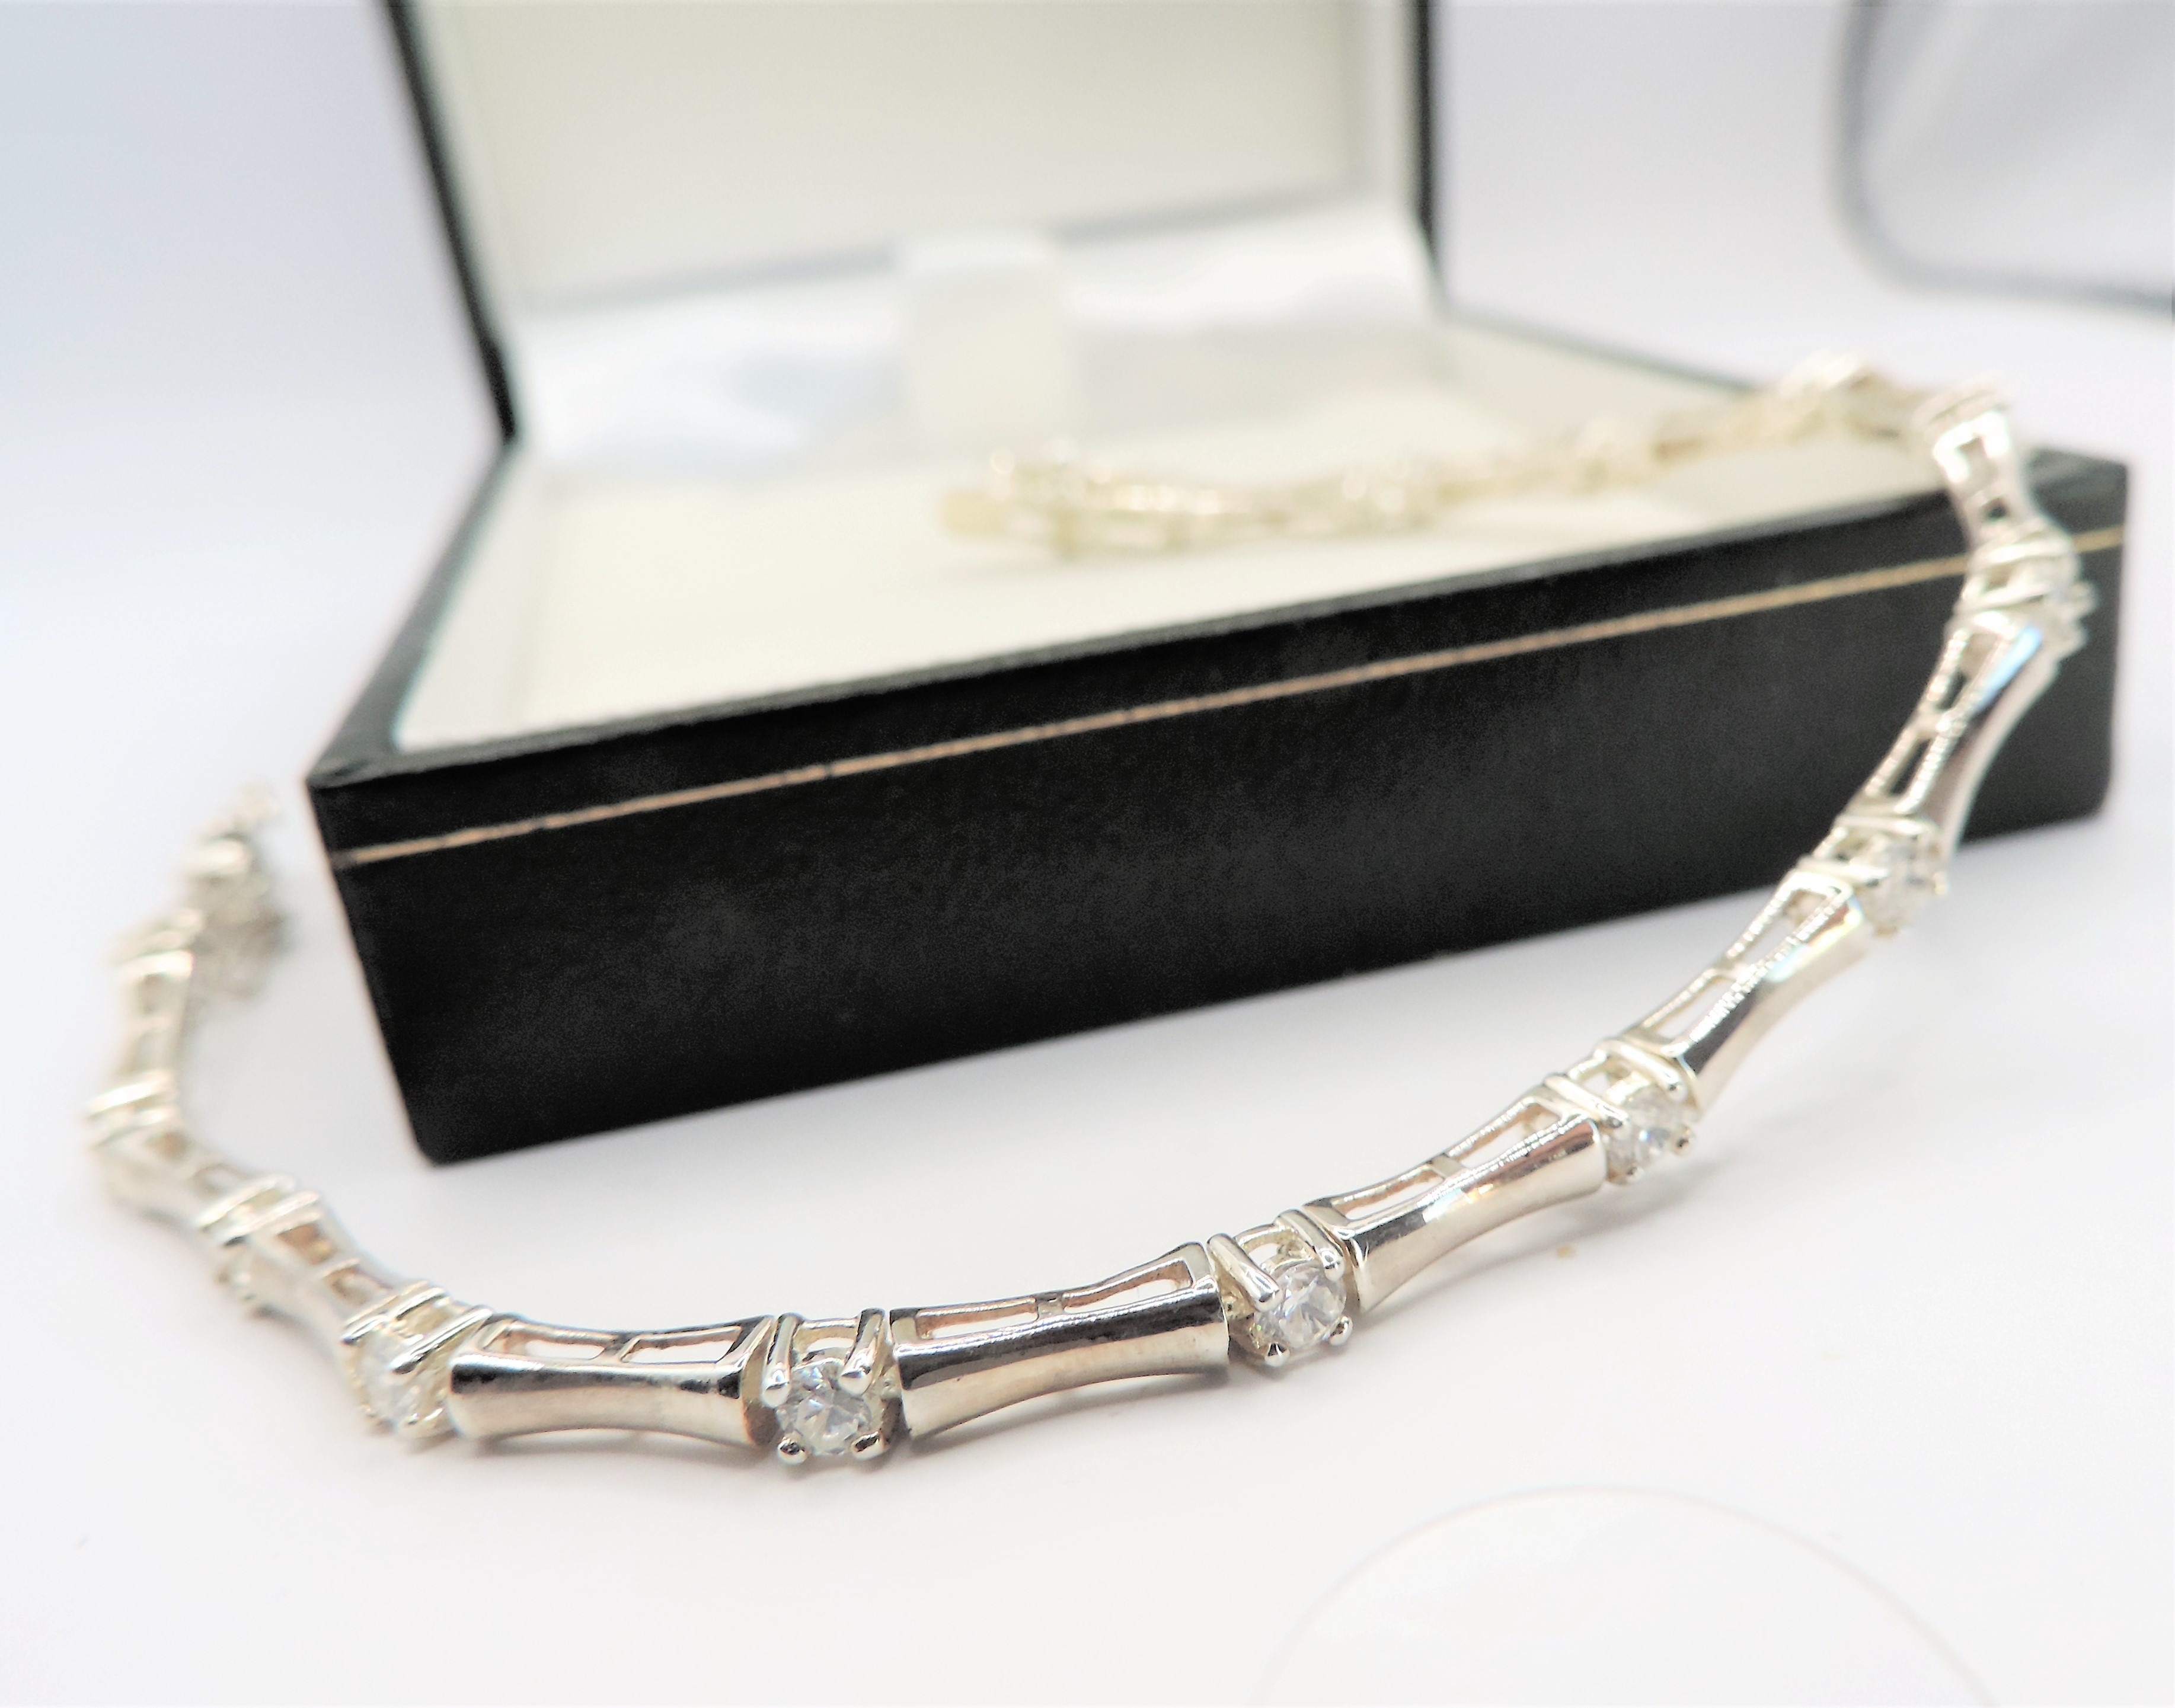 Sterling Silver White Sapphire Bracelet with Gift Box